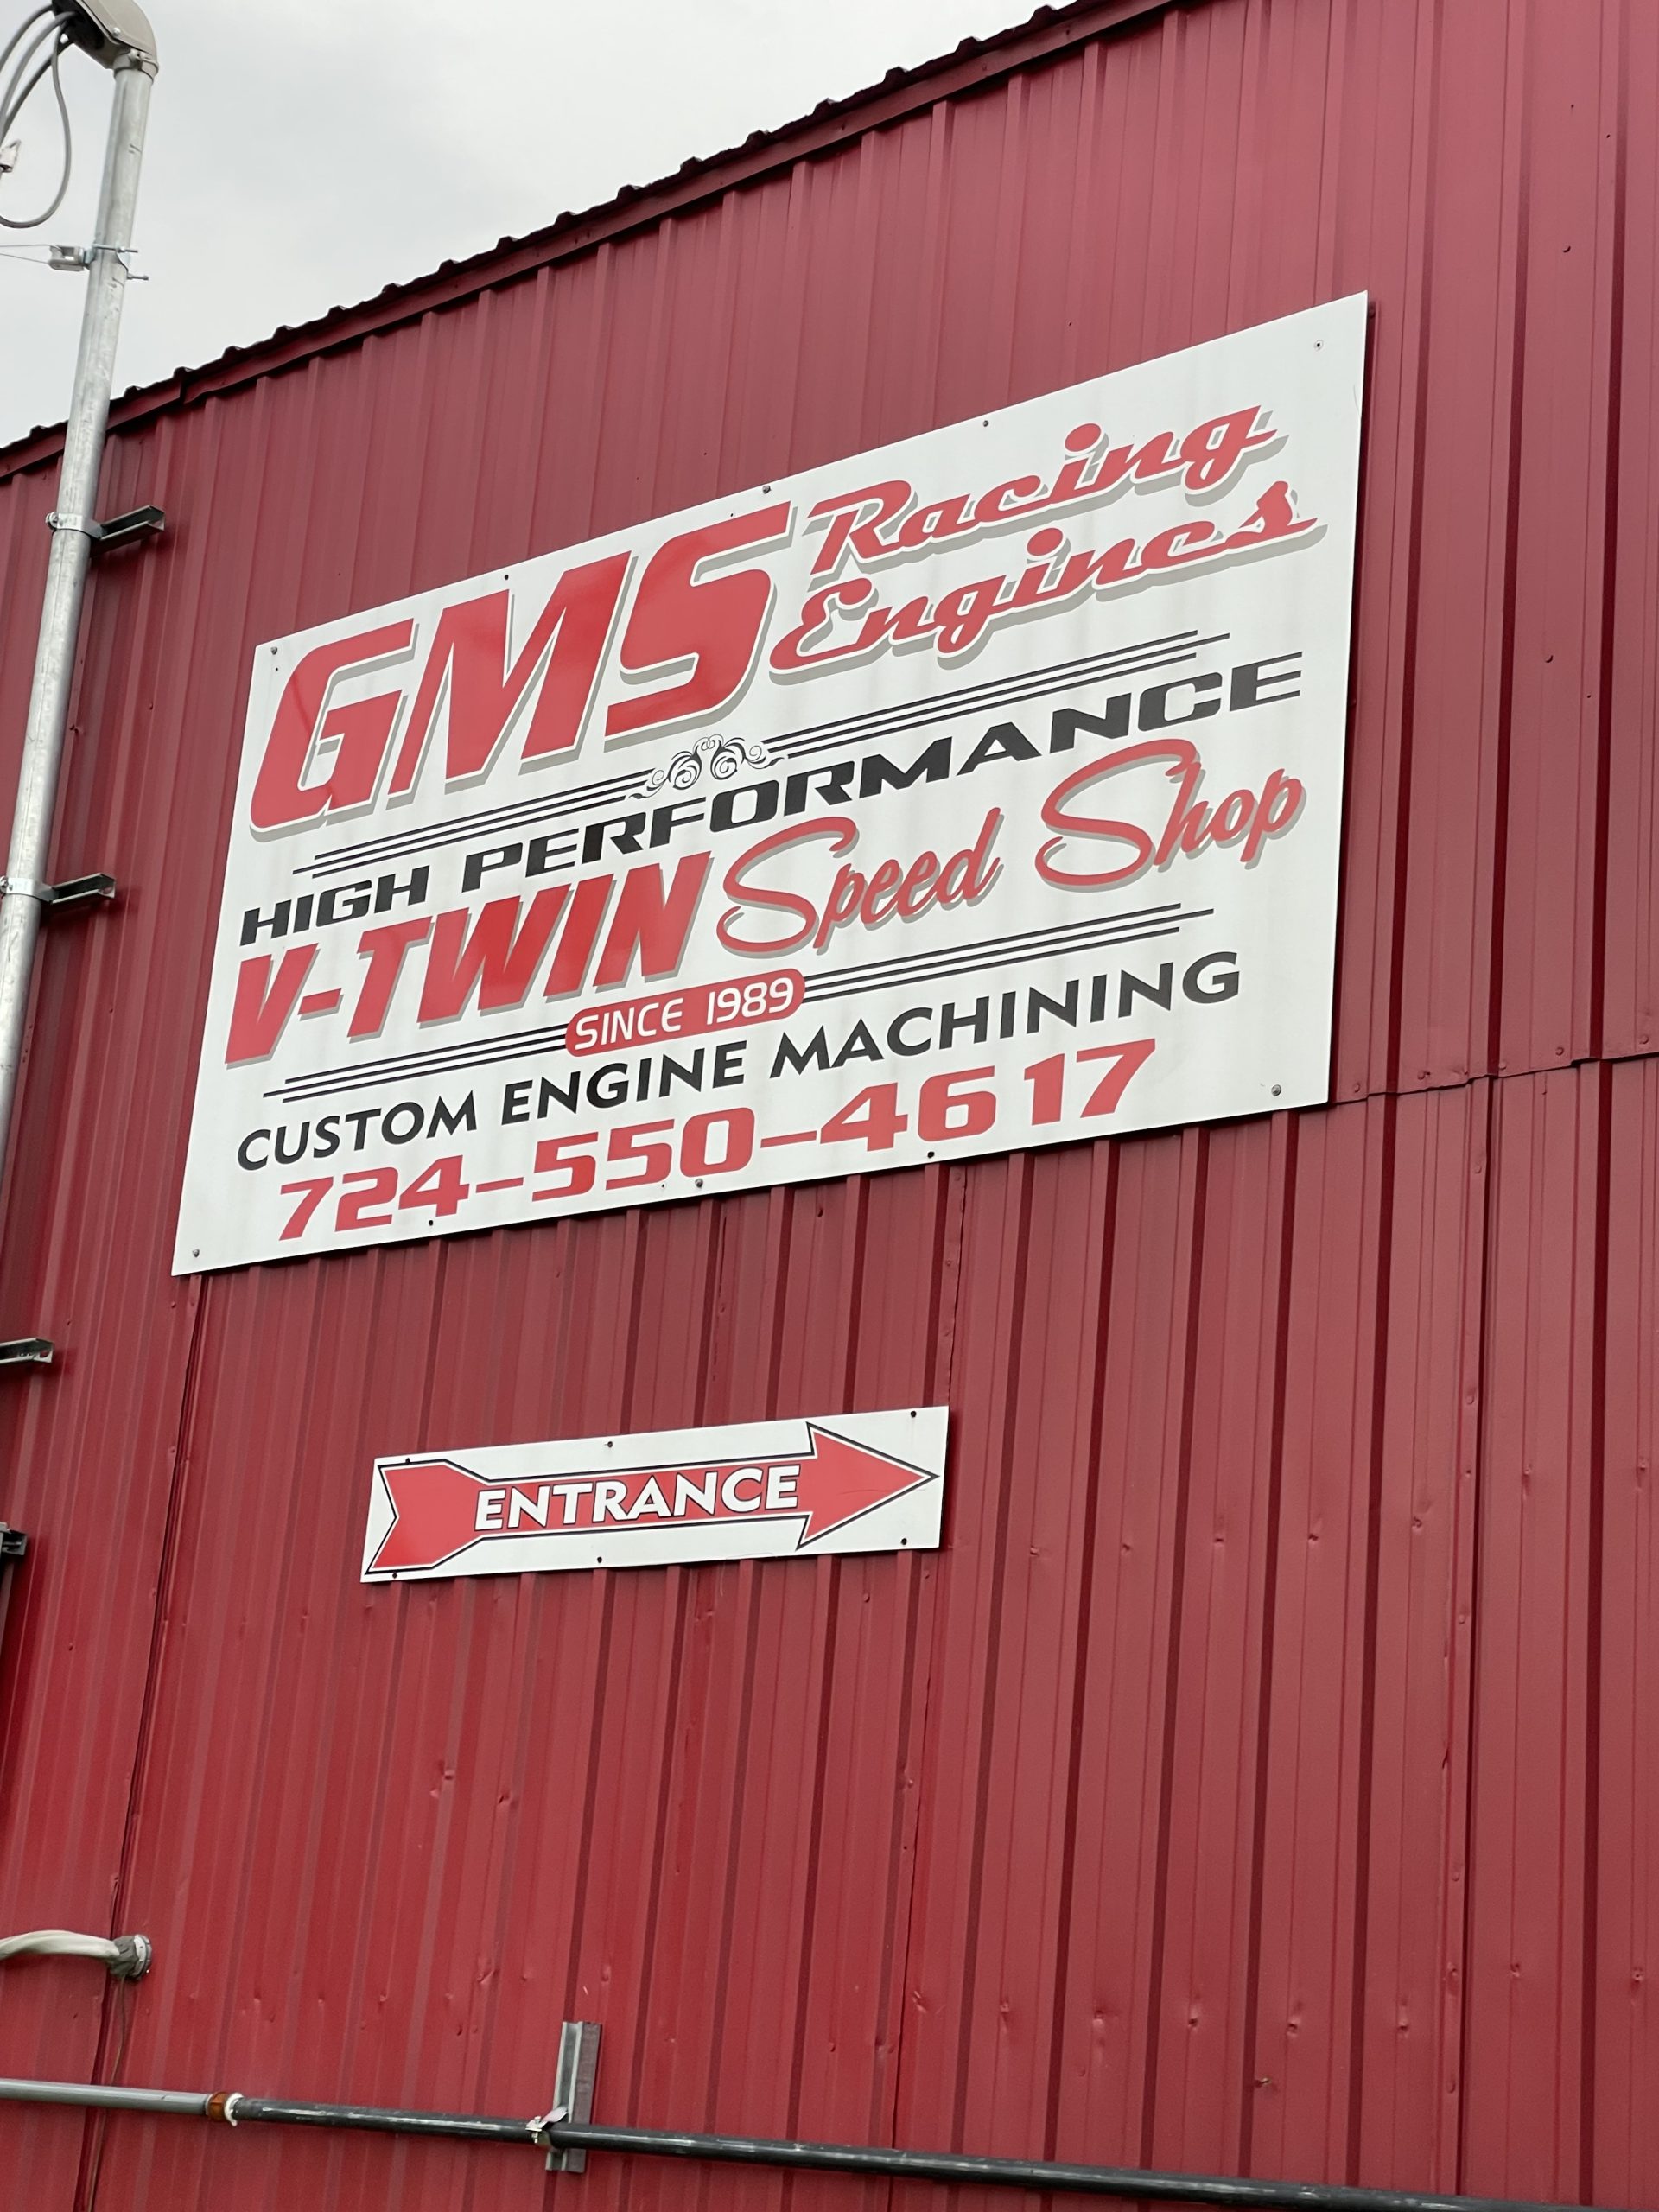 GMS Racing Engines